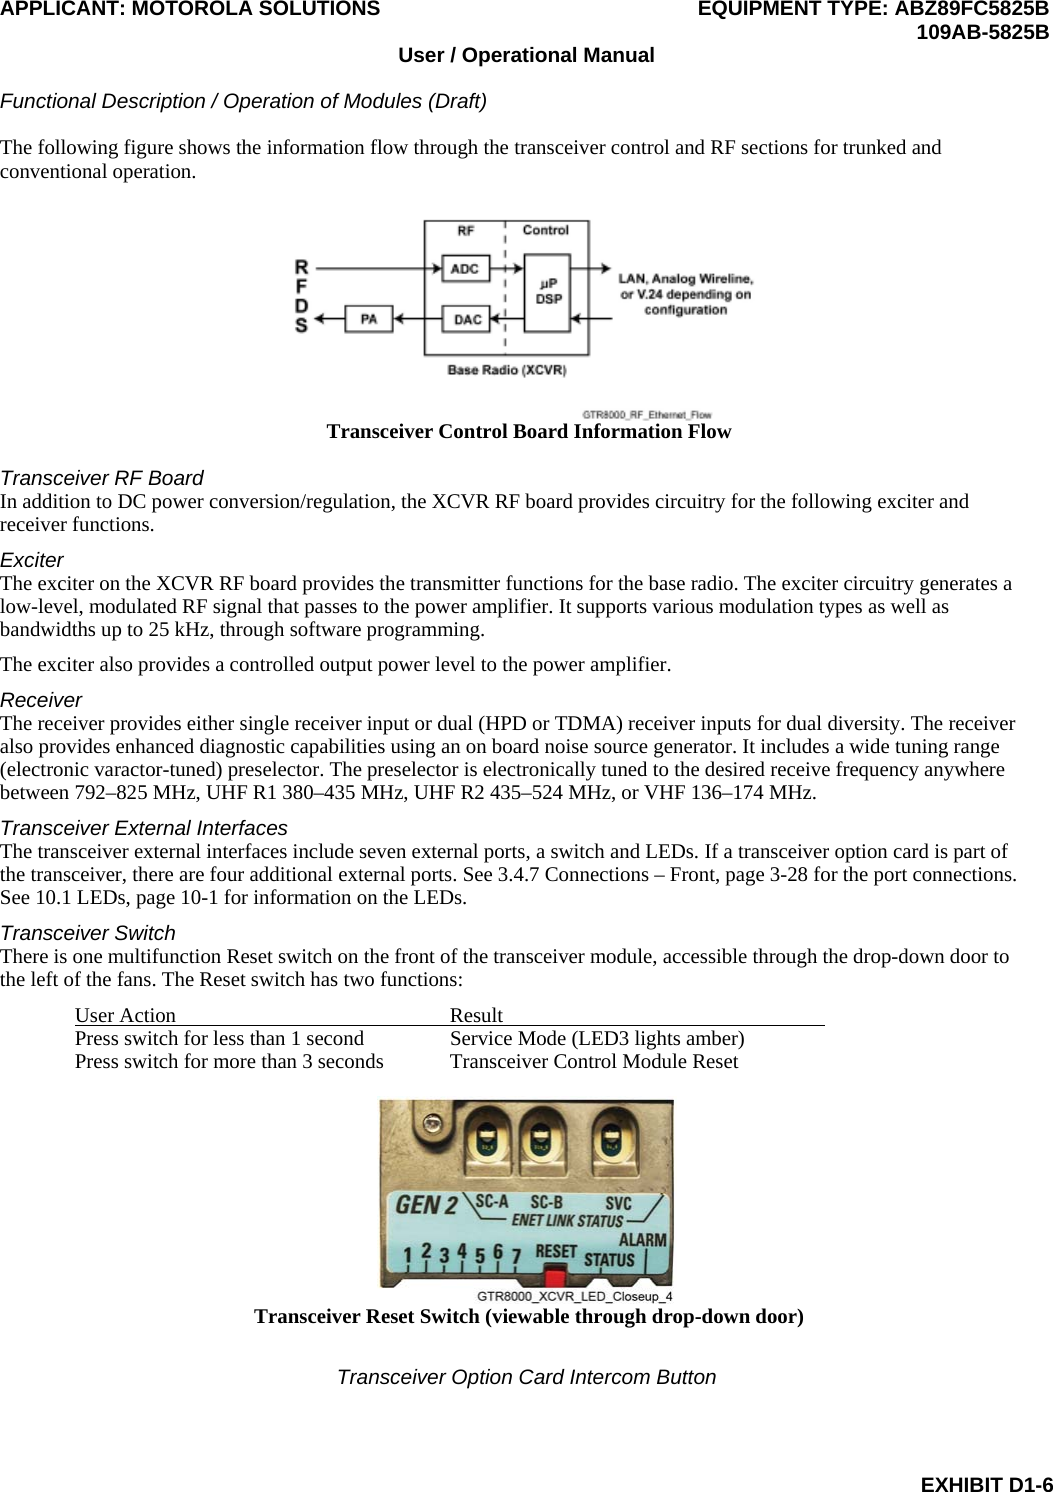 APPLICANT: MOTOROLA SOLUTIONS EQUIPMENT TYPE: ABZ89FC5825B  109AB-5825B User / Operational Manual  Functional Description / Operation of Modules (Draft)  EXHIBIT D1-6 The following figure shows the information flow through the transceiver control and RF sections for trunked and conventional operation.  Transceiver Control Board Information Flow  Transceiver RF Board In addition to DC power conversion/regulation, the XCVR RF board provides circuitry for the following exciter and receiver functions. Exciter The exciter on the XCVR RF board provides the transmitter functions for the base radio. The exciter circuitry generates a low-level, modulated RF signal that passes to the power amplifier. It supports various modulation types as well as bandwidths up to 25 kHz, through software programming. The exciter also provides a controlled output power level to the power amplifier. Receiver The receiver provides either single receiver input or dual (HPD or TDMA) receiver inputs for dual diversity. The receiver also provides enhanced diagnostic capabilities using an on board noise source generator. It includes a wide tuning range (electronic varactor-tuned) preselector. The preselector is electronically tuned to the desired receive frequency anywhere between 792–825 MHz, UHF R1 380–435 MHz, UHF R2 435–524 MHz, or VHF 136–174 MHz. Transceiver External Interfaces The transceiver external interfaces include seven external ports, a switch and LEDs. If a transceiver option card is part of the transceiver, there are four additional external ports. See 3.4.7 Connections – Front, page 3-28 for the port connections. See 10.1 LEDs, page 10-1 for information on the LEDs. Transceiver Switch There is one multifunction Reset switch on the front of the transceiver module, accessible through the drop-down door to the left of the fans. The Reset switch has two functions: User Action  Result   Press switch for less than 1 second  Service Mode (LED3 lights amber) Press switch for more than 3 seconds  Transceiver Control Module Reset   Transceiver Reset Switch (viewable through drop-down door)  Transceiver Option Card Intercom Button 